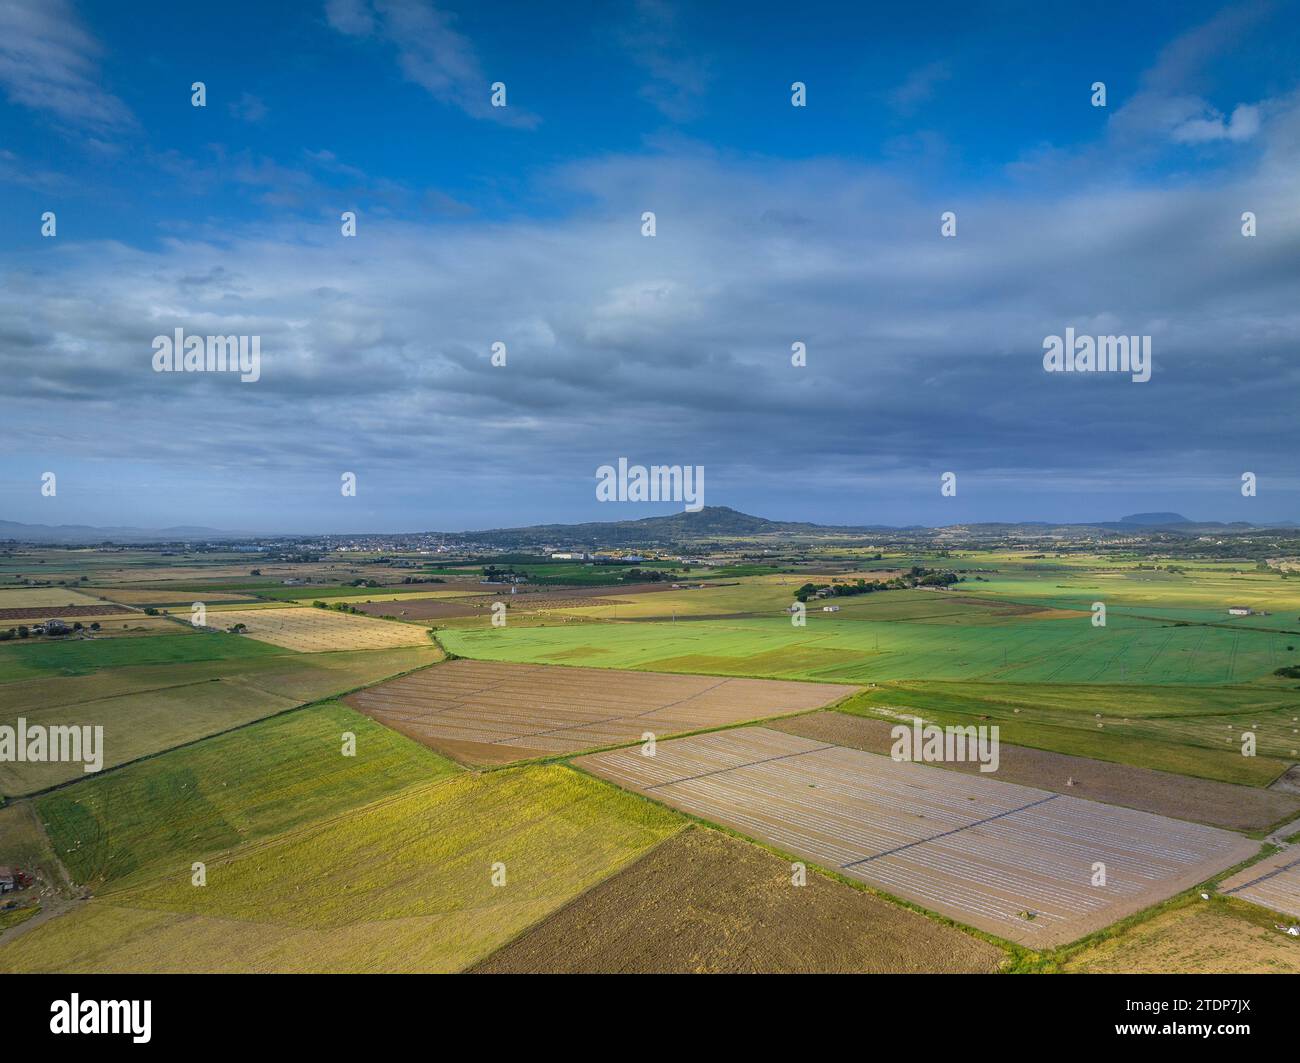 Aerial view of fields and agricultural environments near the village of Ariany in spring (Mallorca, Balearic Islands, Spain) Stock Photo